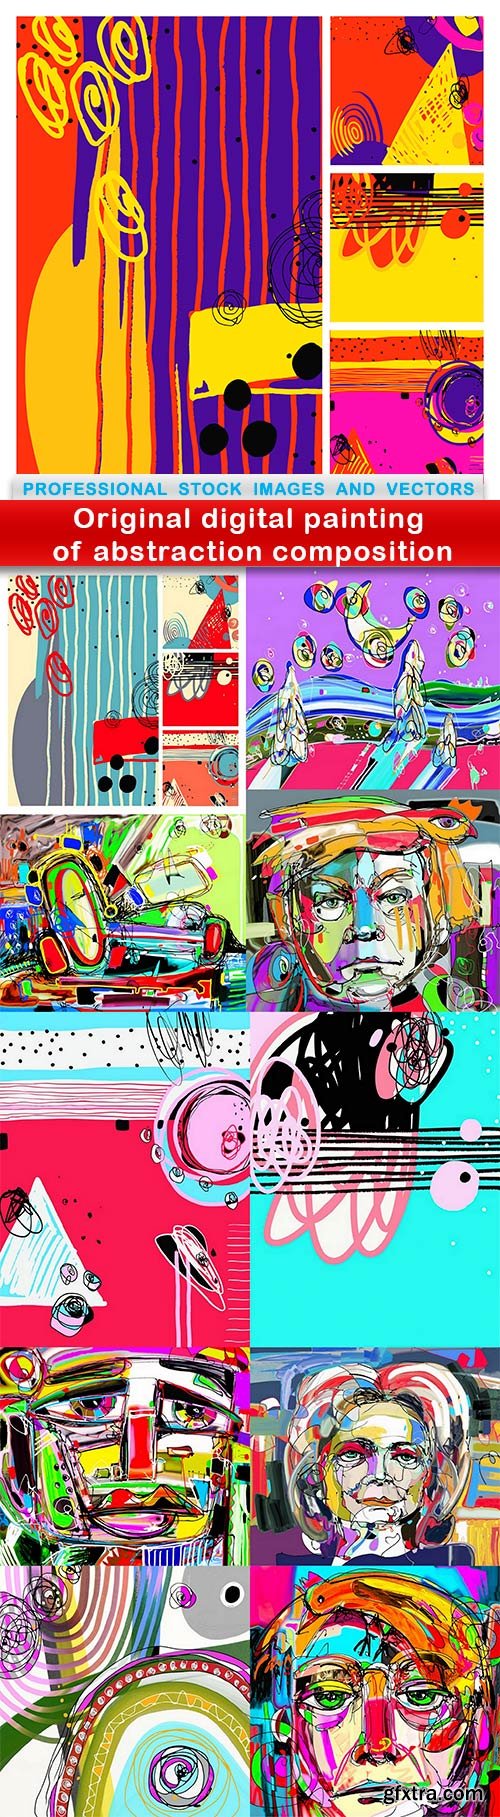 Original digital painting of abstraction composition - 11 EPS